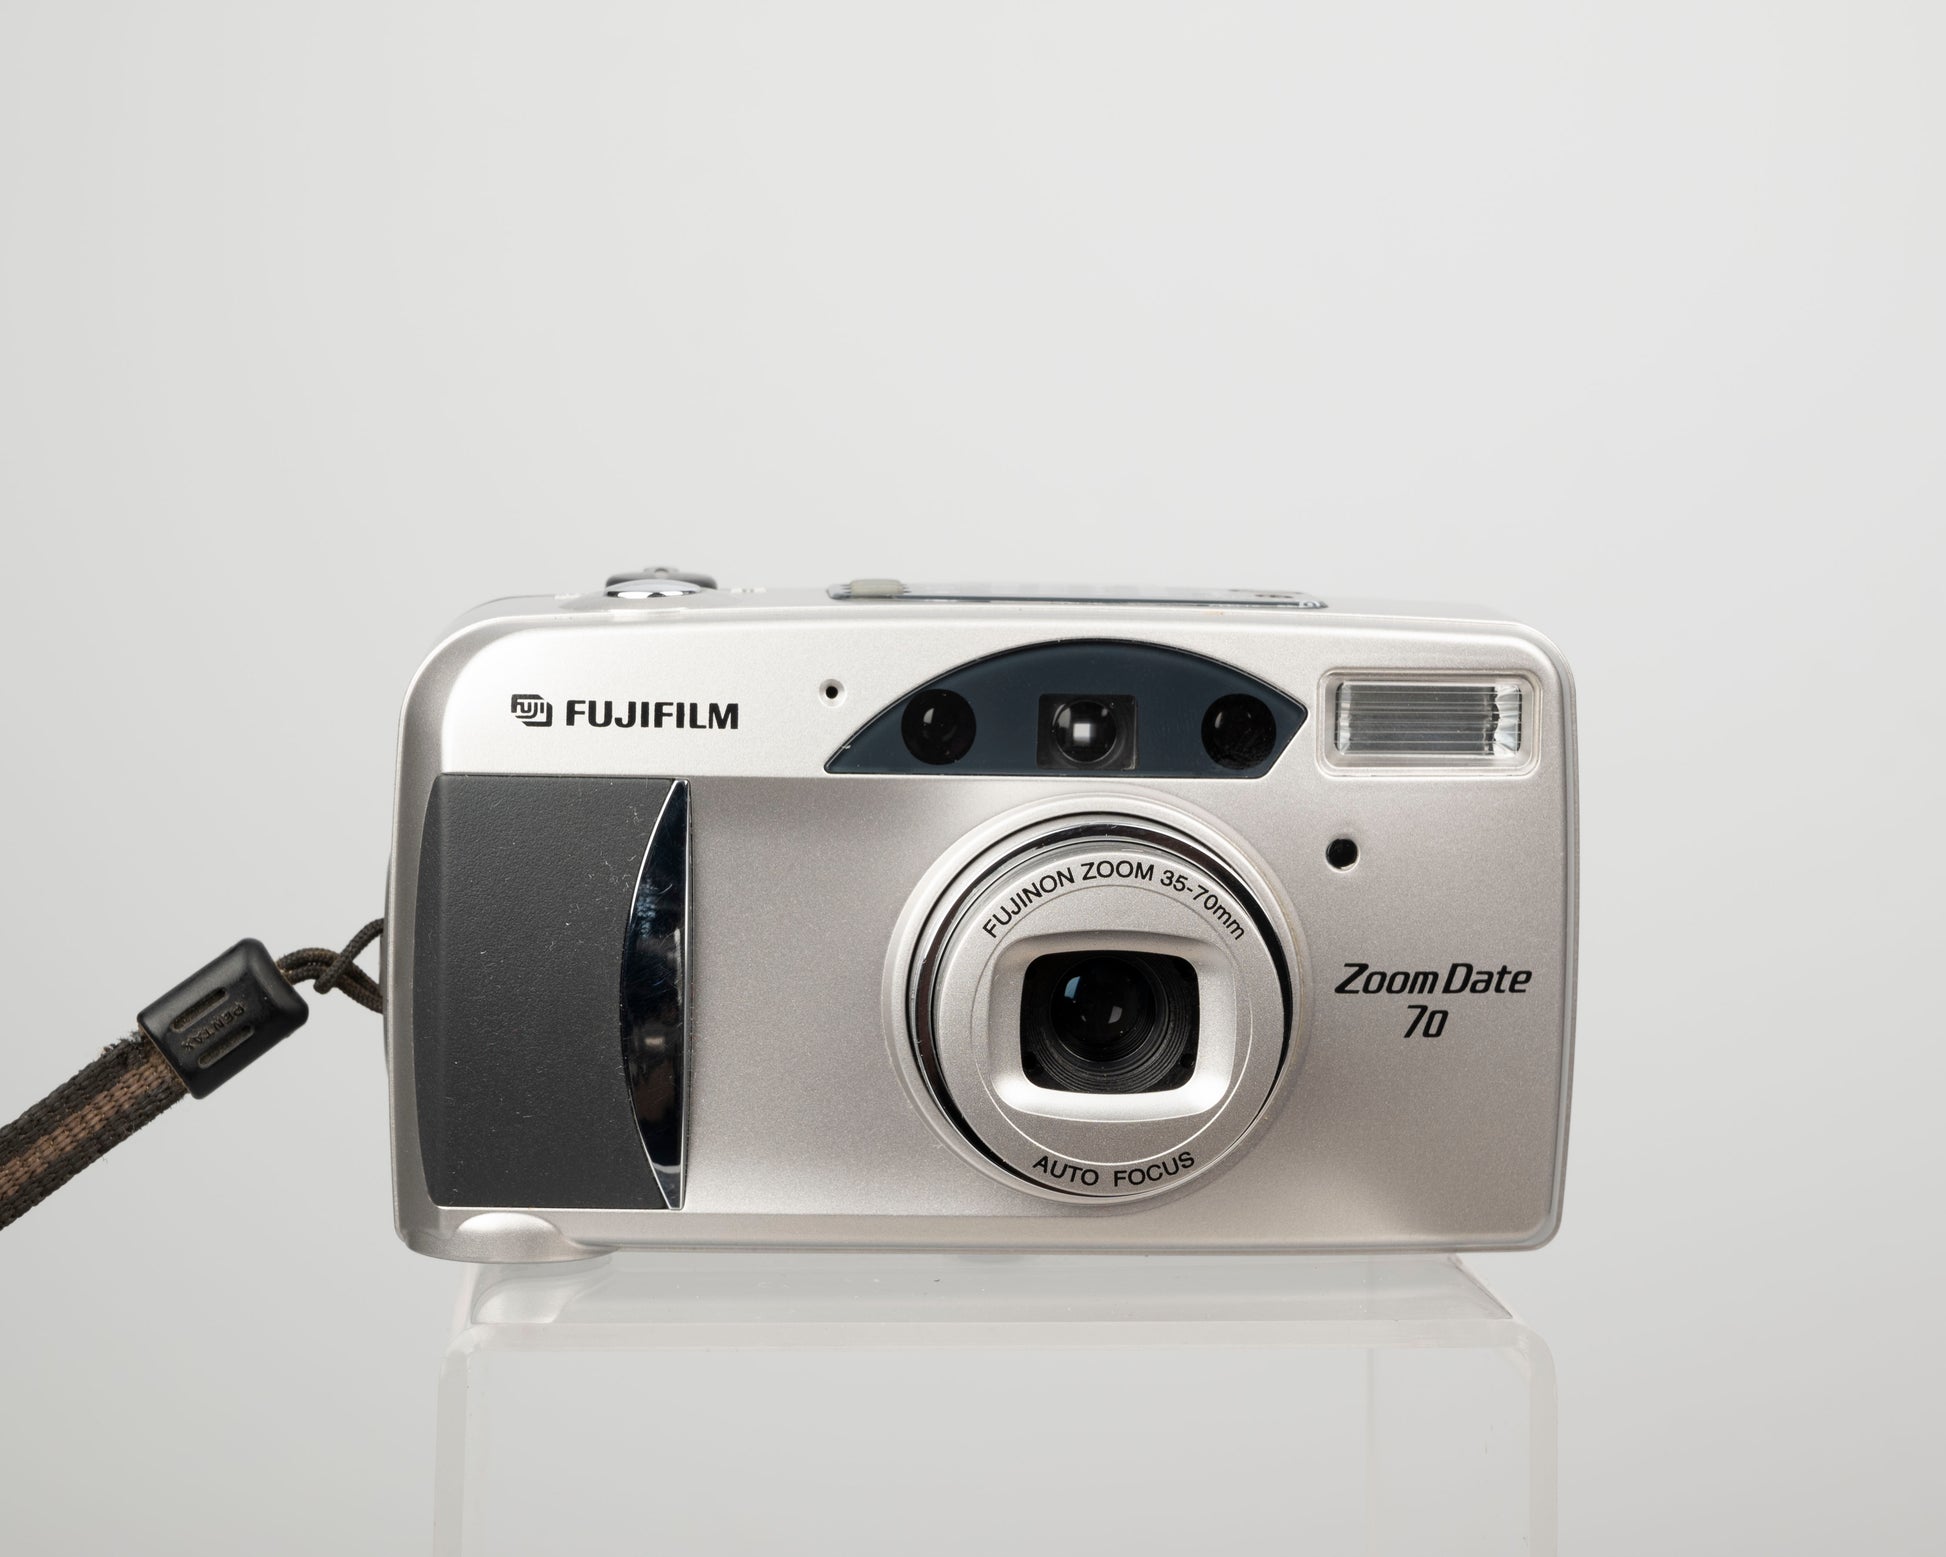 The Fujifilm Zoom Date 70 (aka Silvi 70) is quality 35mm zoom point-and-shoot camera from 2001